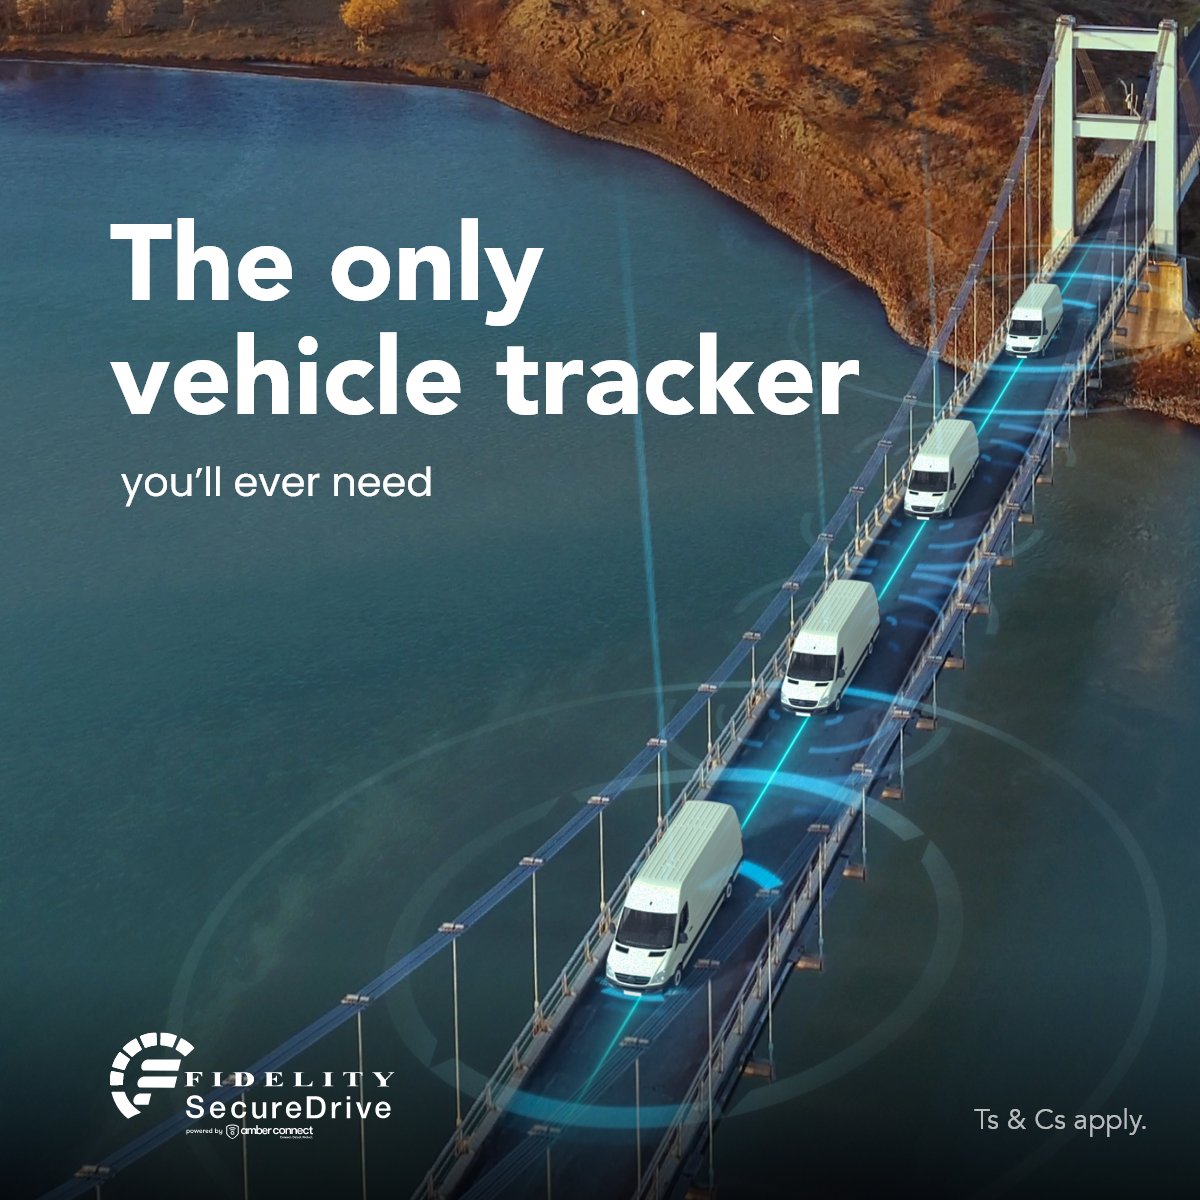 If it moves on wheels, we’ll protect it.

#FidelitySecureDrive #VehicleTracking #YourDrivingCompanion